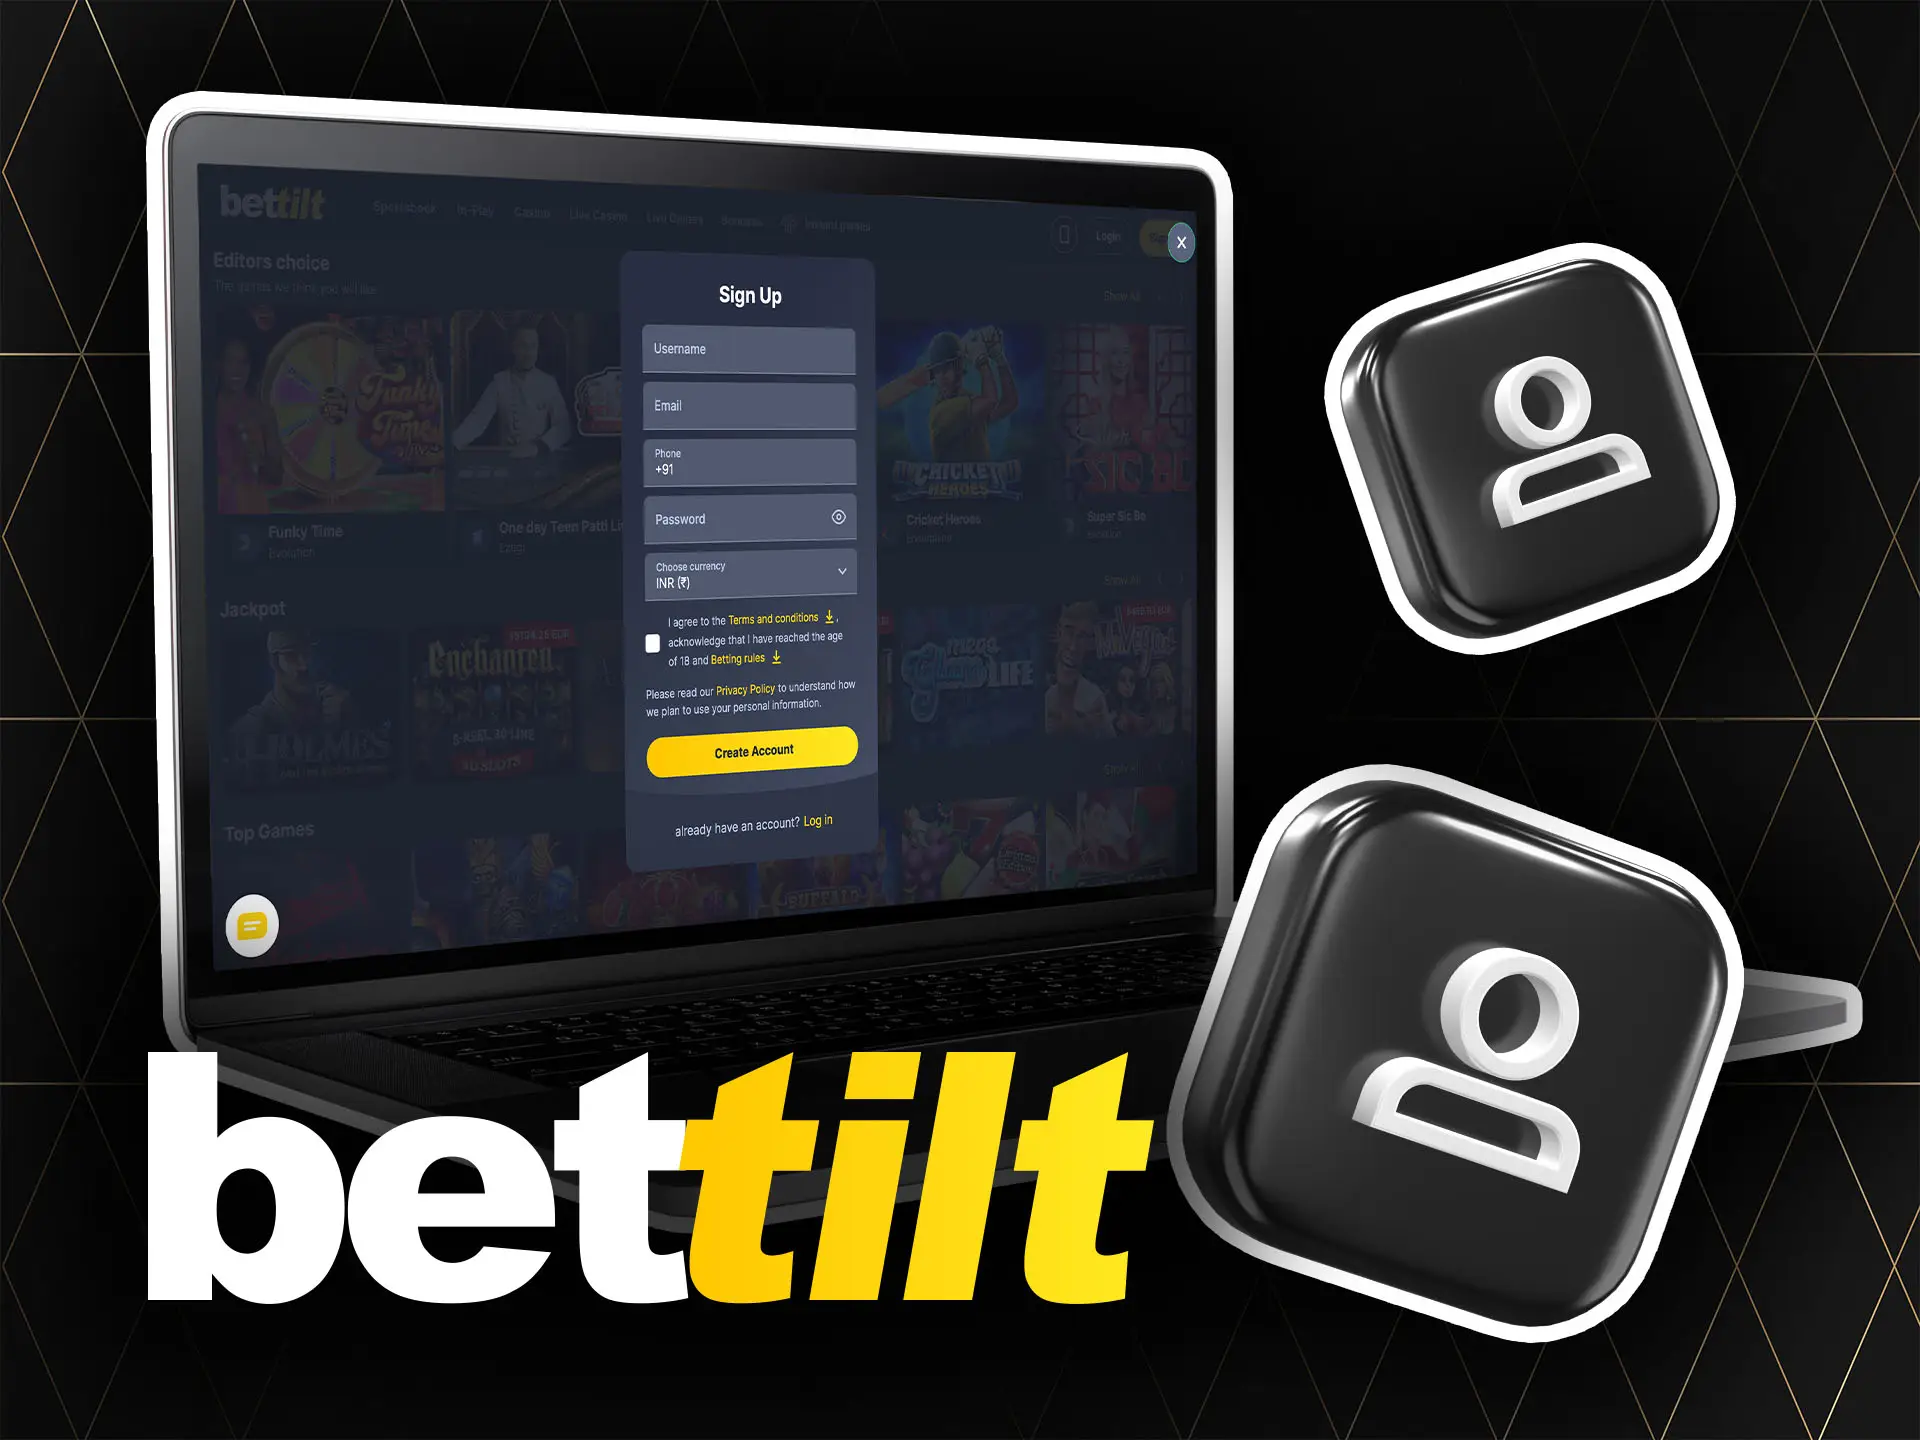 Open the Bettilt official website and create your own account.